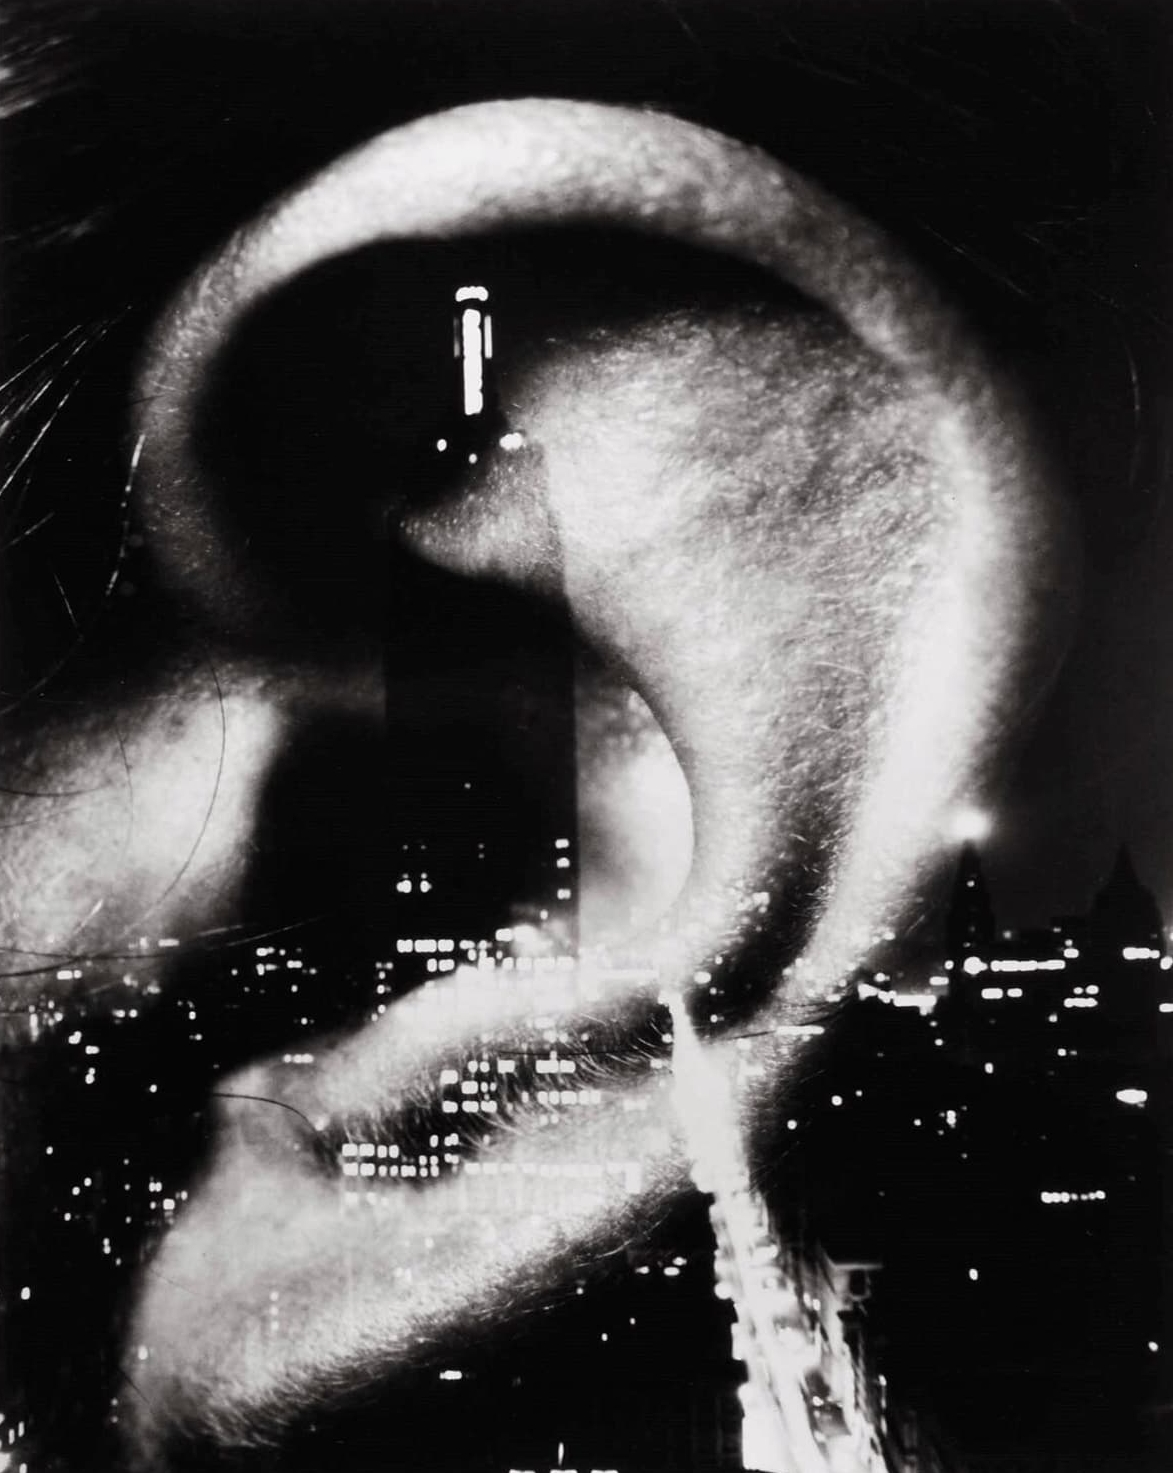 A picture of a city at night-time with a large skyscraper in the foreground. A photo of a person’s ear is layered over the city image. 